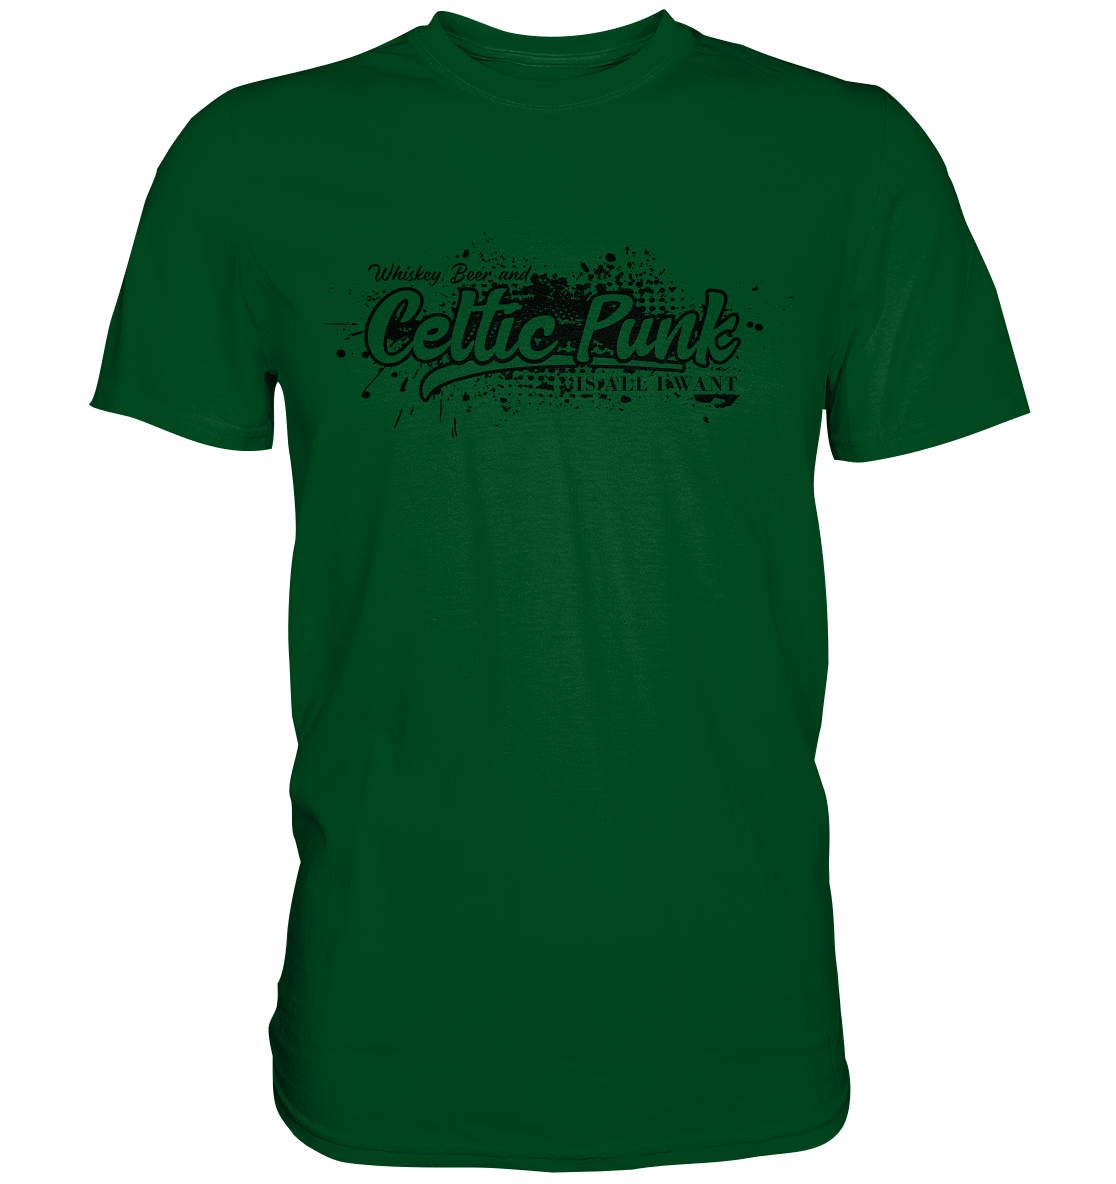 Whiskey, Beer And Celtic Punk "Is All I Want" - Premium Shirt